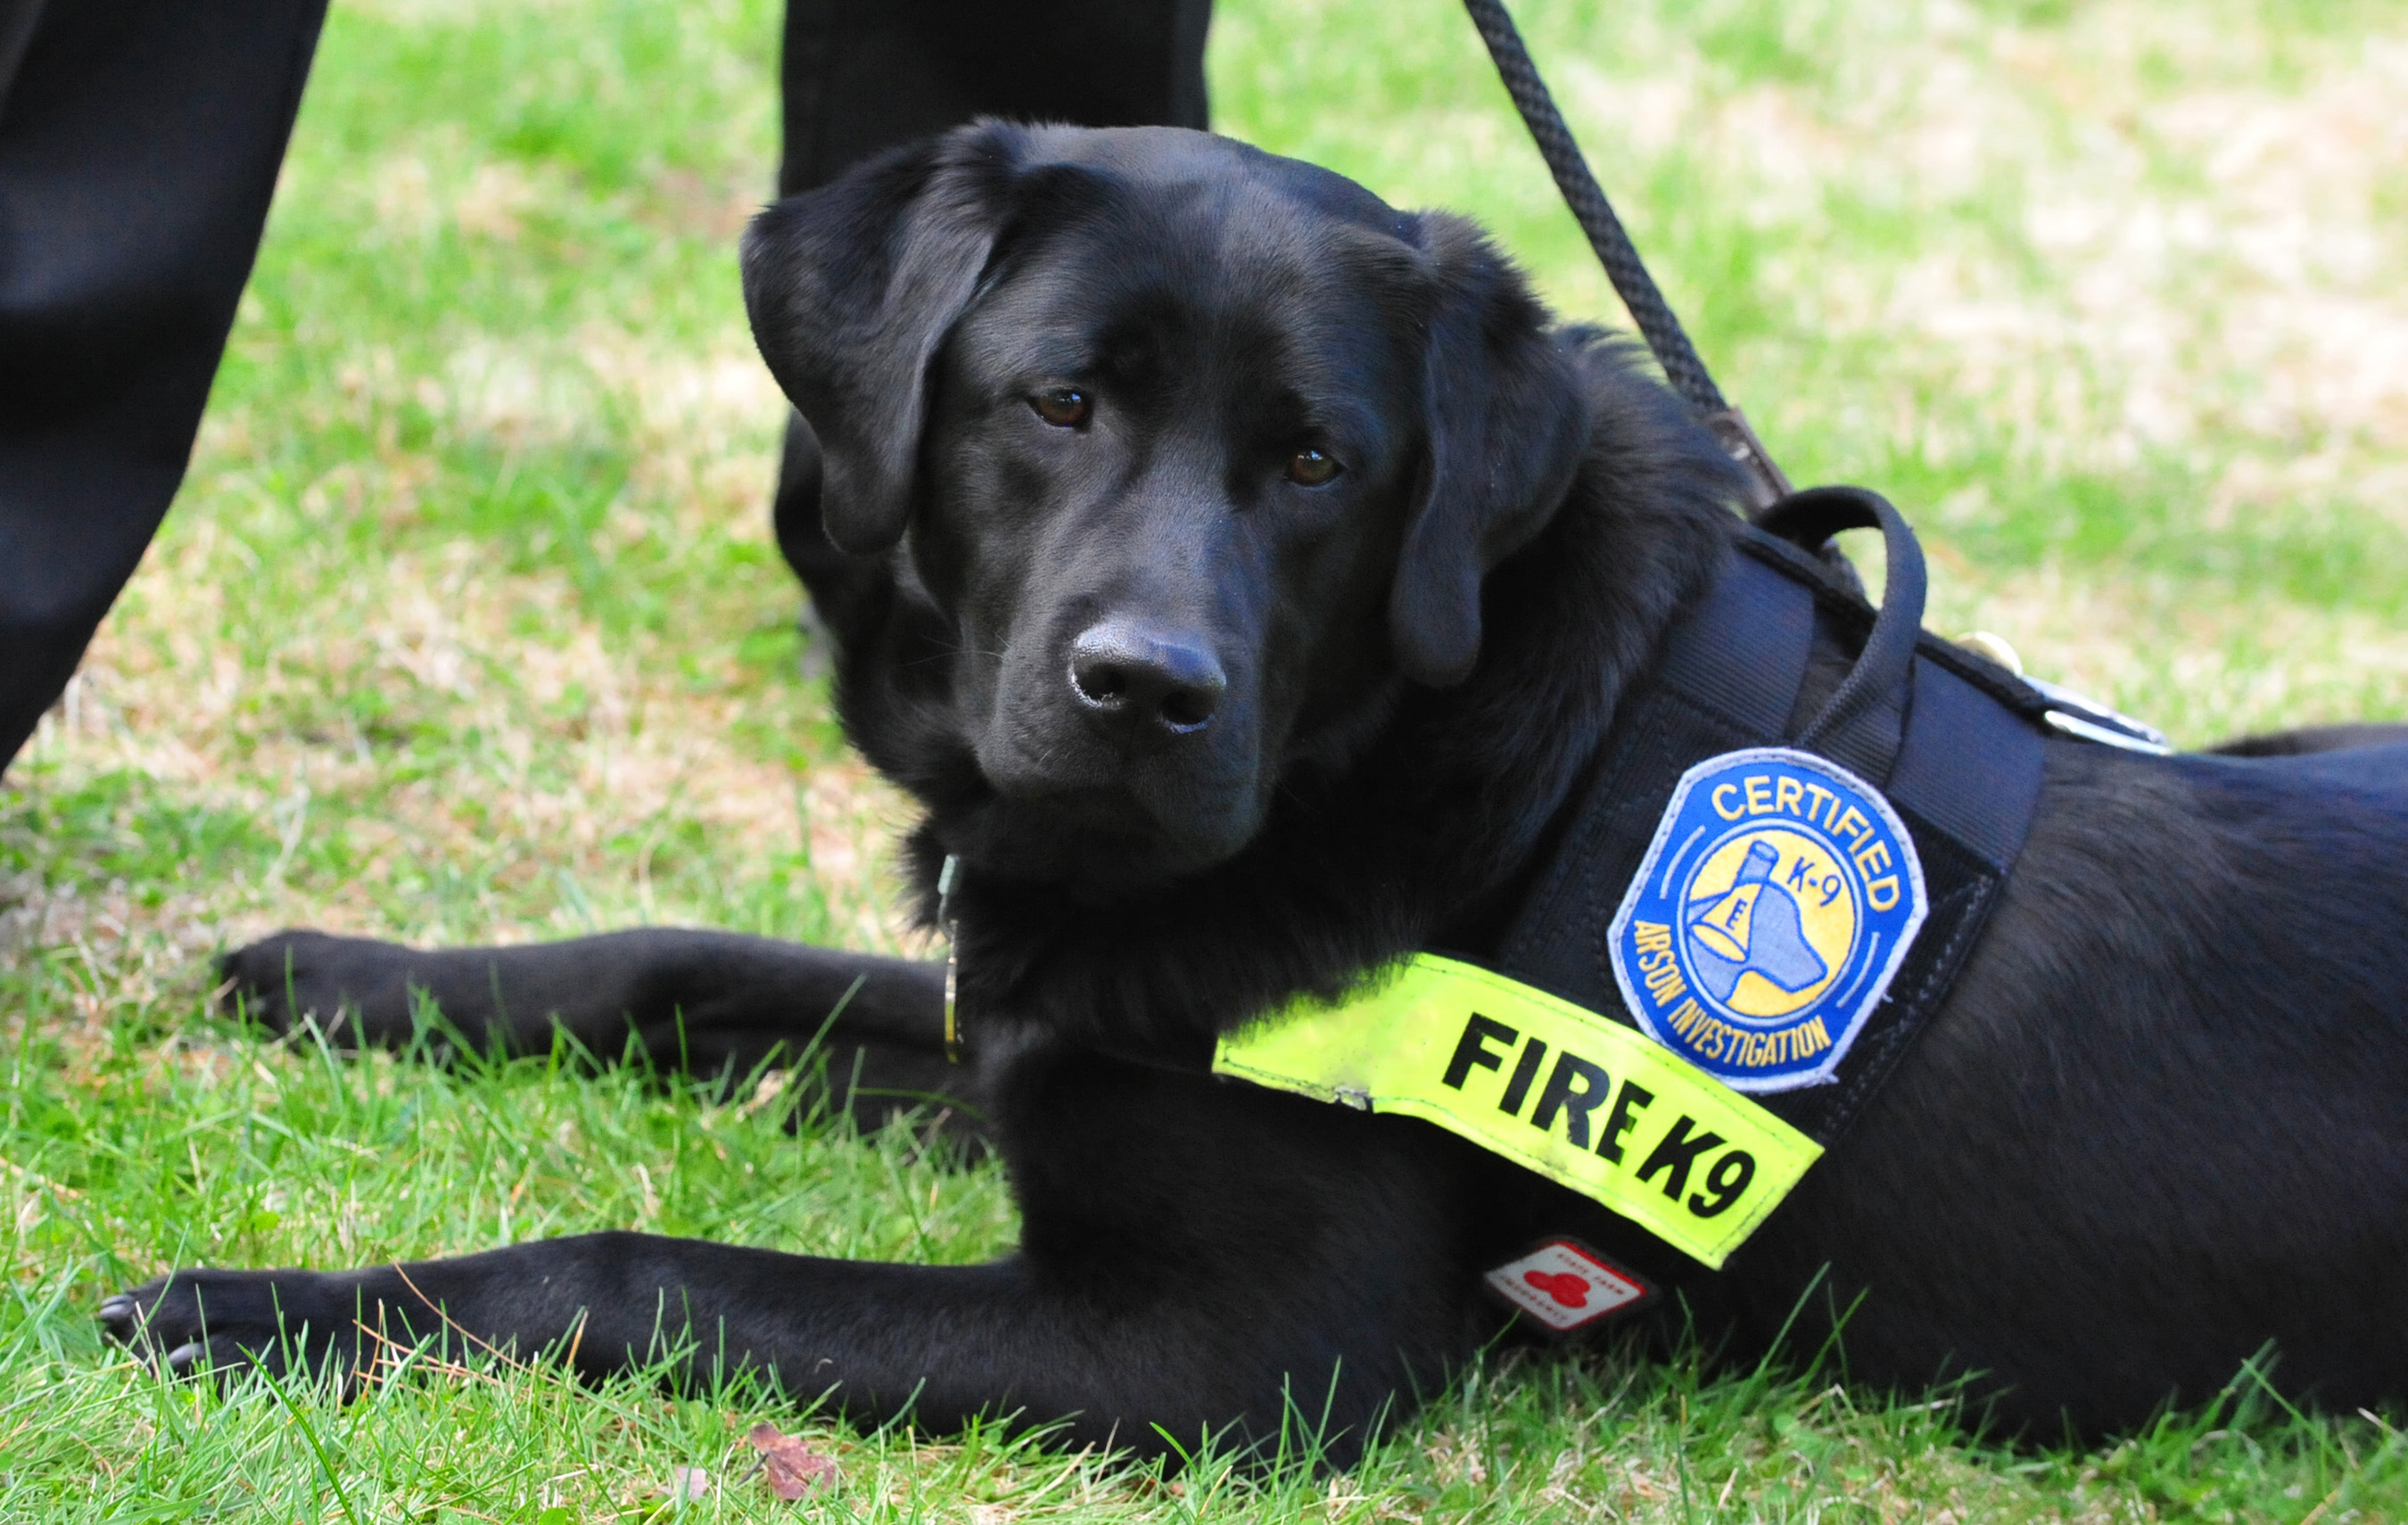 All of the dogs in the State Farm Arson Dog Program are Labrador retrievers from disability assistance or guide dog programs, animal shelters, or canine rescue organizations.